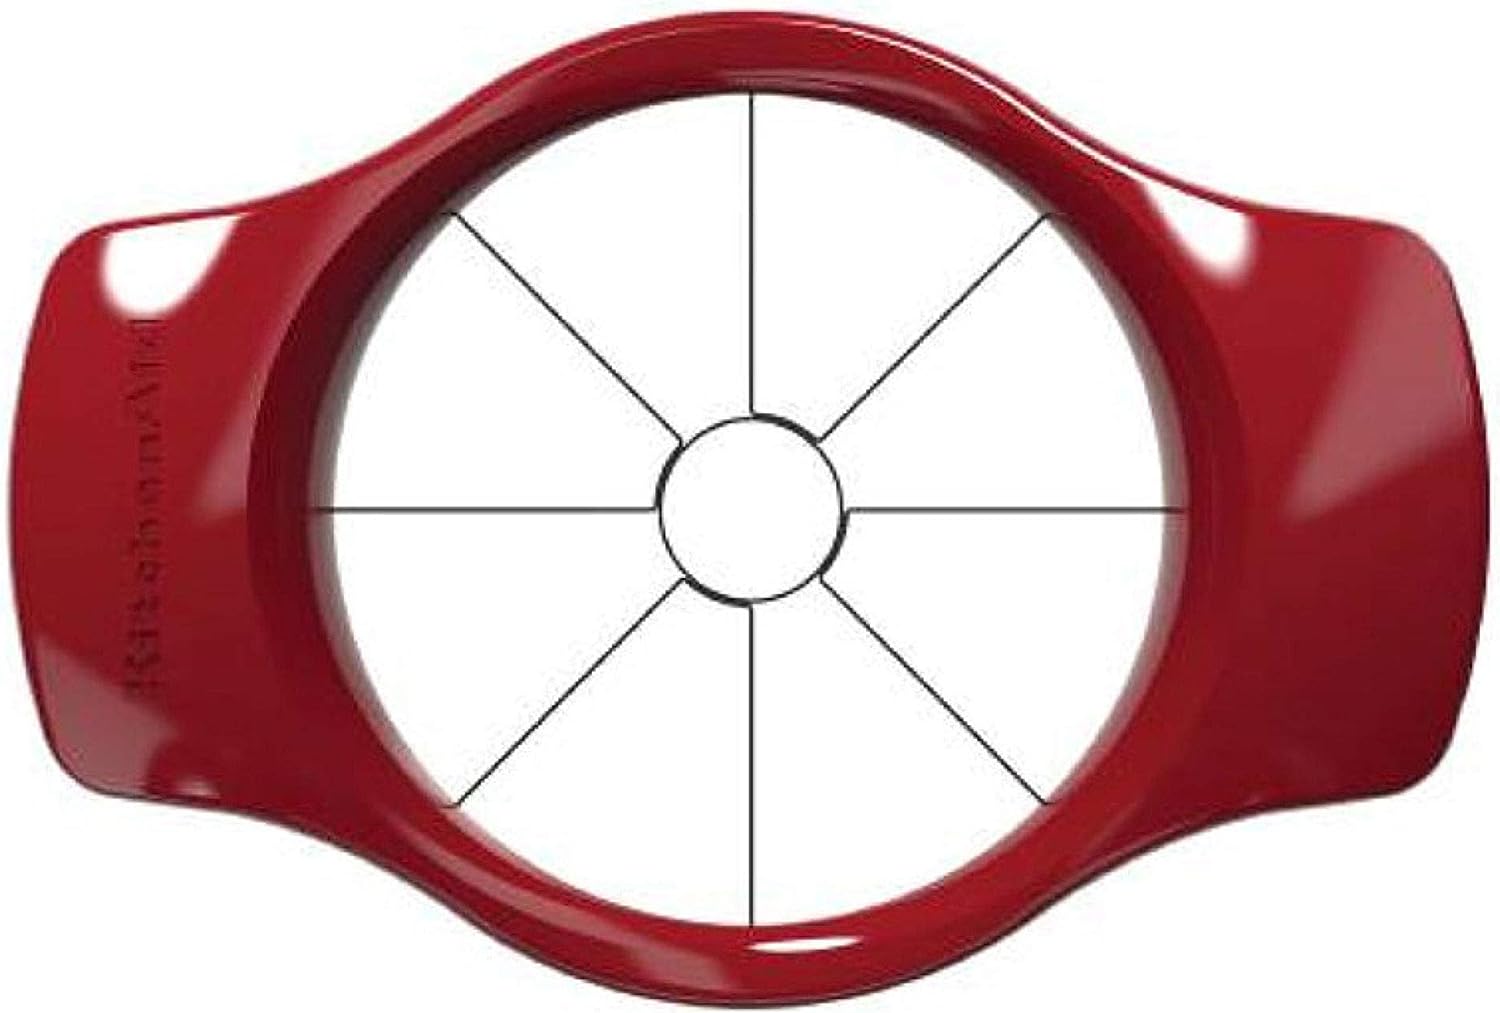 KitchenAid Classic Fruit Slicer (Red) $6.29 + Free Shipping w/ Prime or on $35+